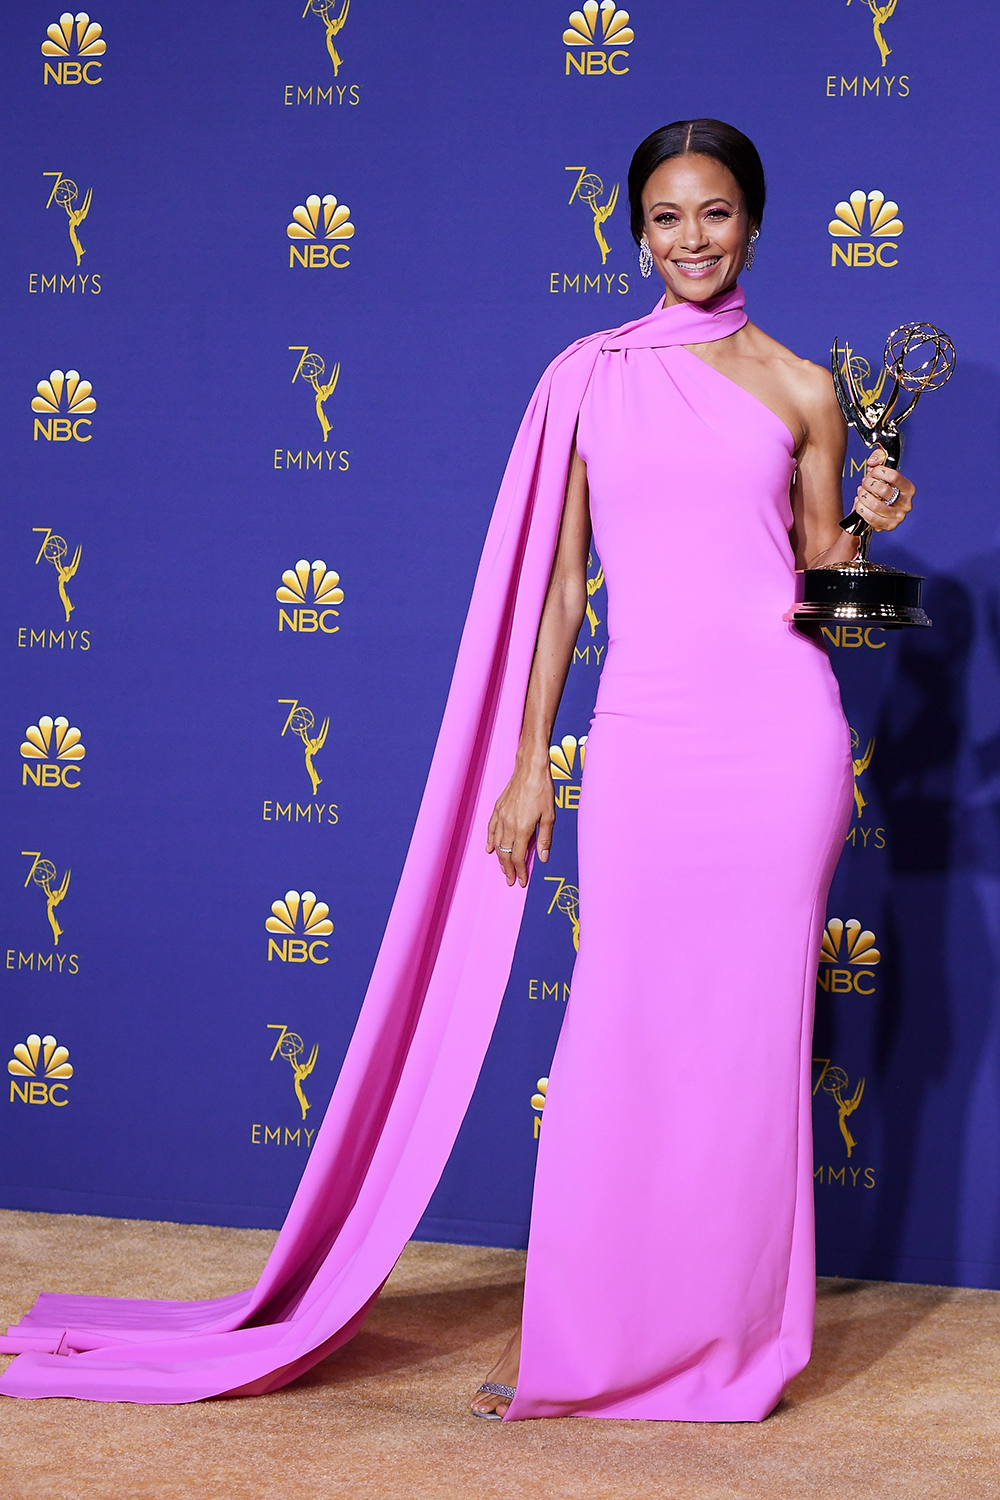 LOS ANGELES, CA - SEPTEMBER 17: Outstanding Supporting Actress in a Drama Series Thandie Newton poses in the press room during the 70th Emmy Awards at Microsoft Theater on September 17, 2018 in Los Angeles, California. (Photo by Steve Granitz/WireImage)